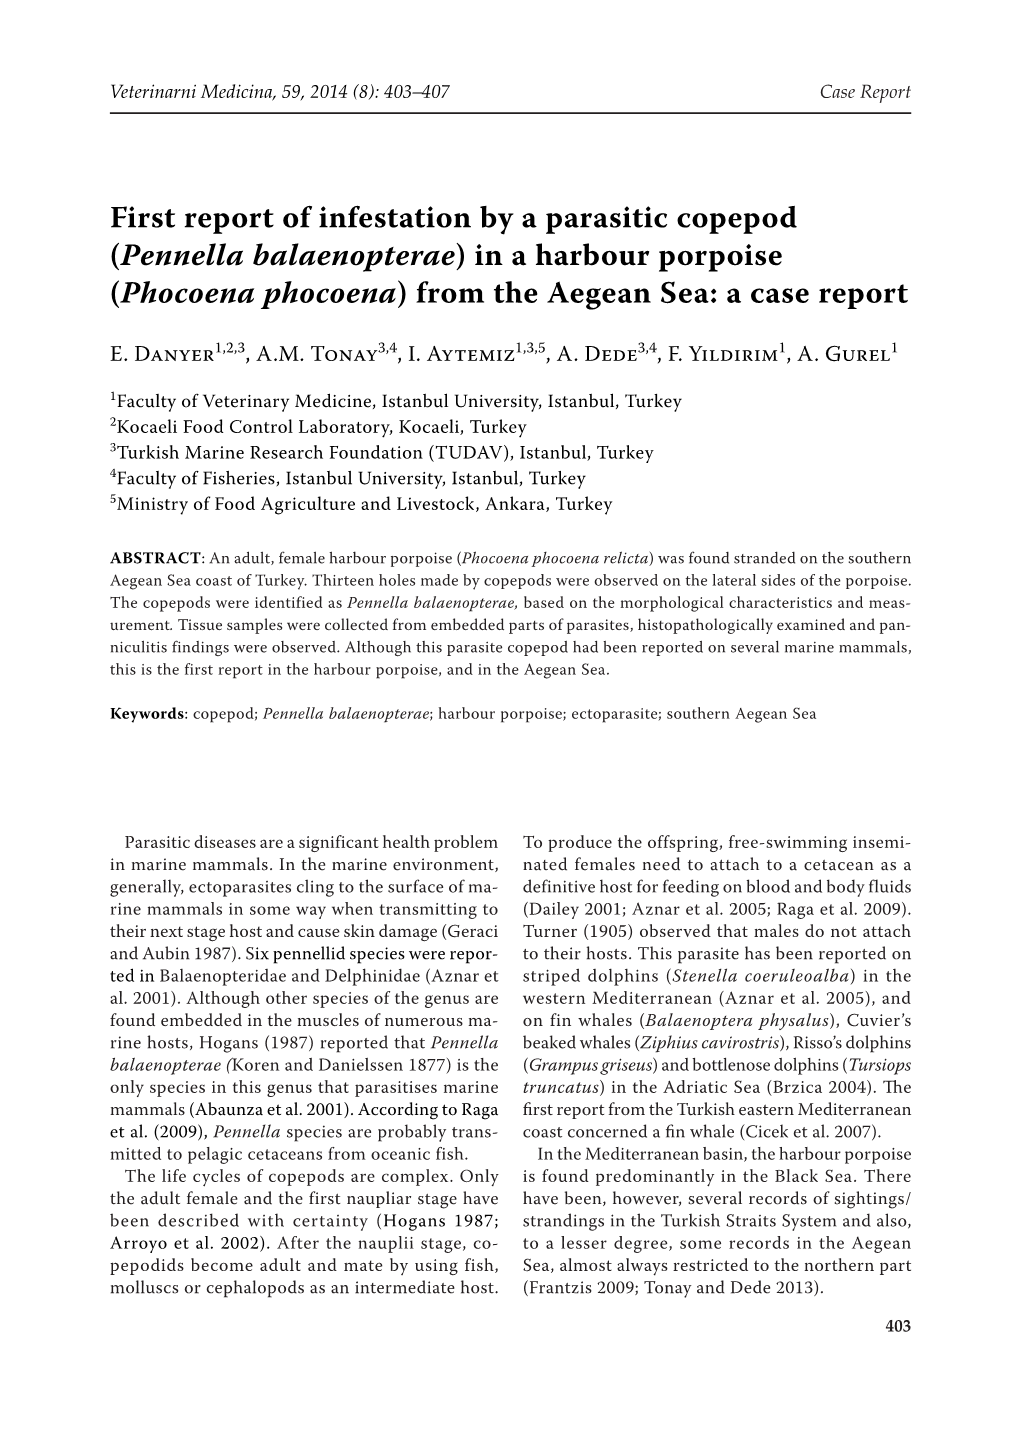 First Report of Infestation by a Parasitic Copepod (Pennella Balaenopterae) in a Harbour Porpoise (Phocoena Phocoena) from the Aegean Sea: a Case Report